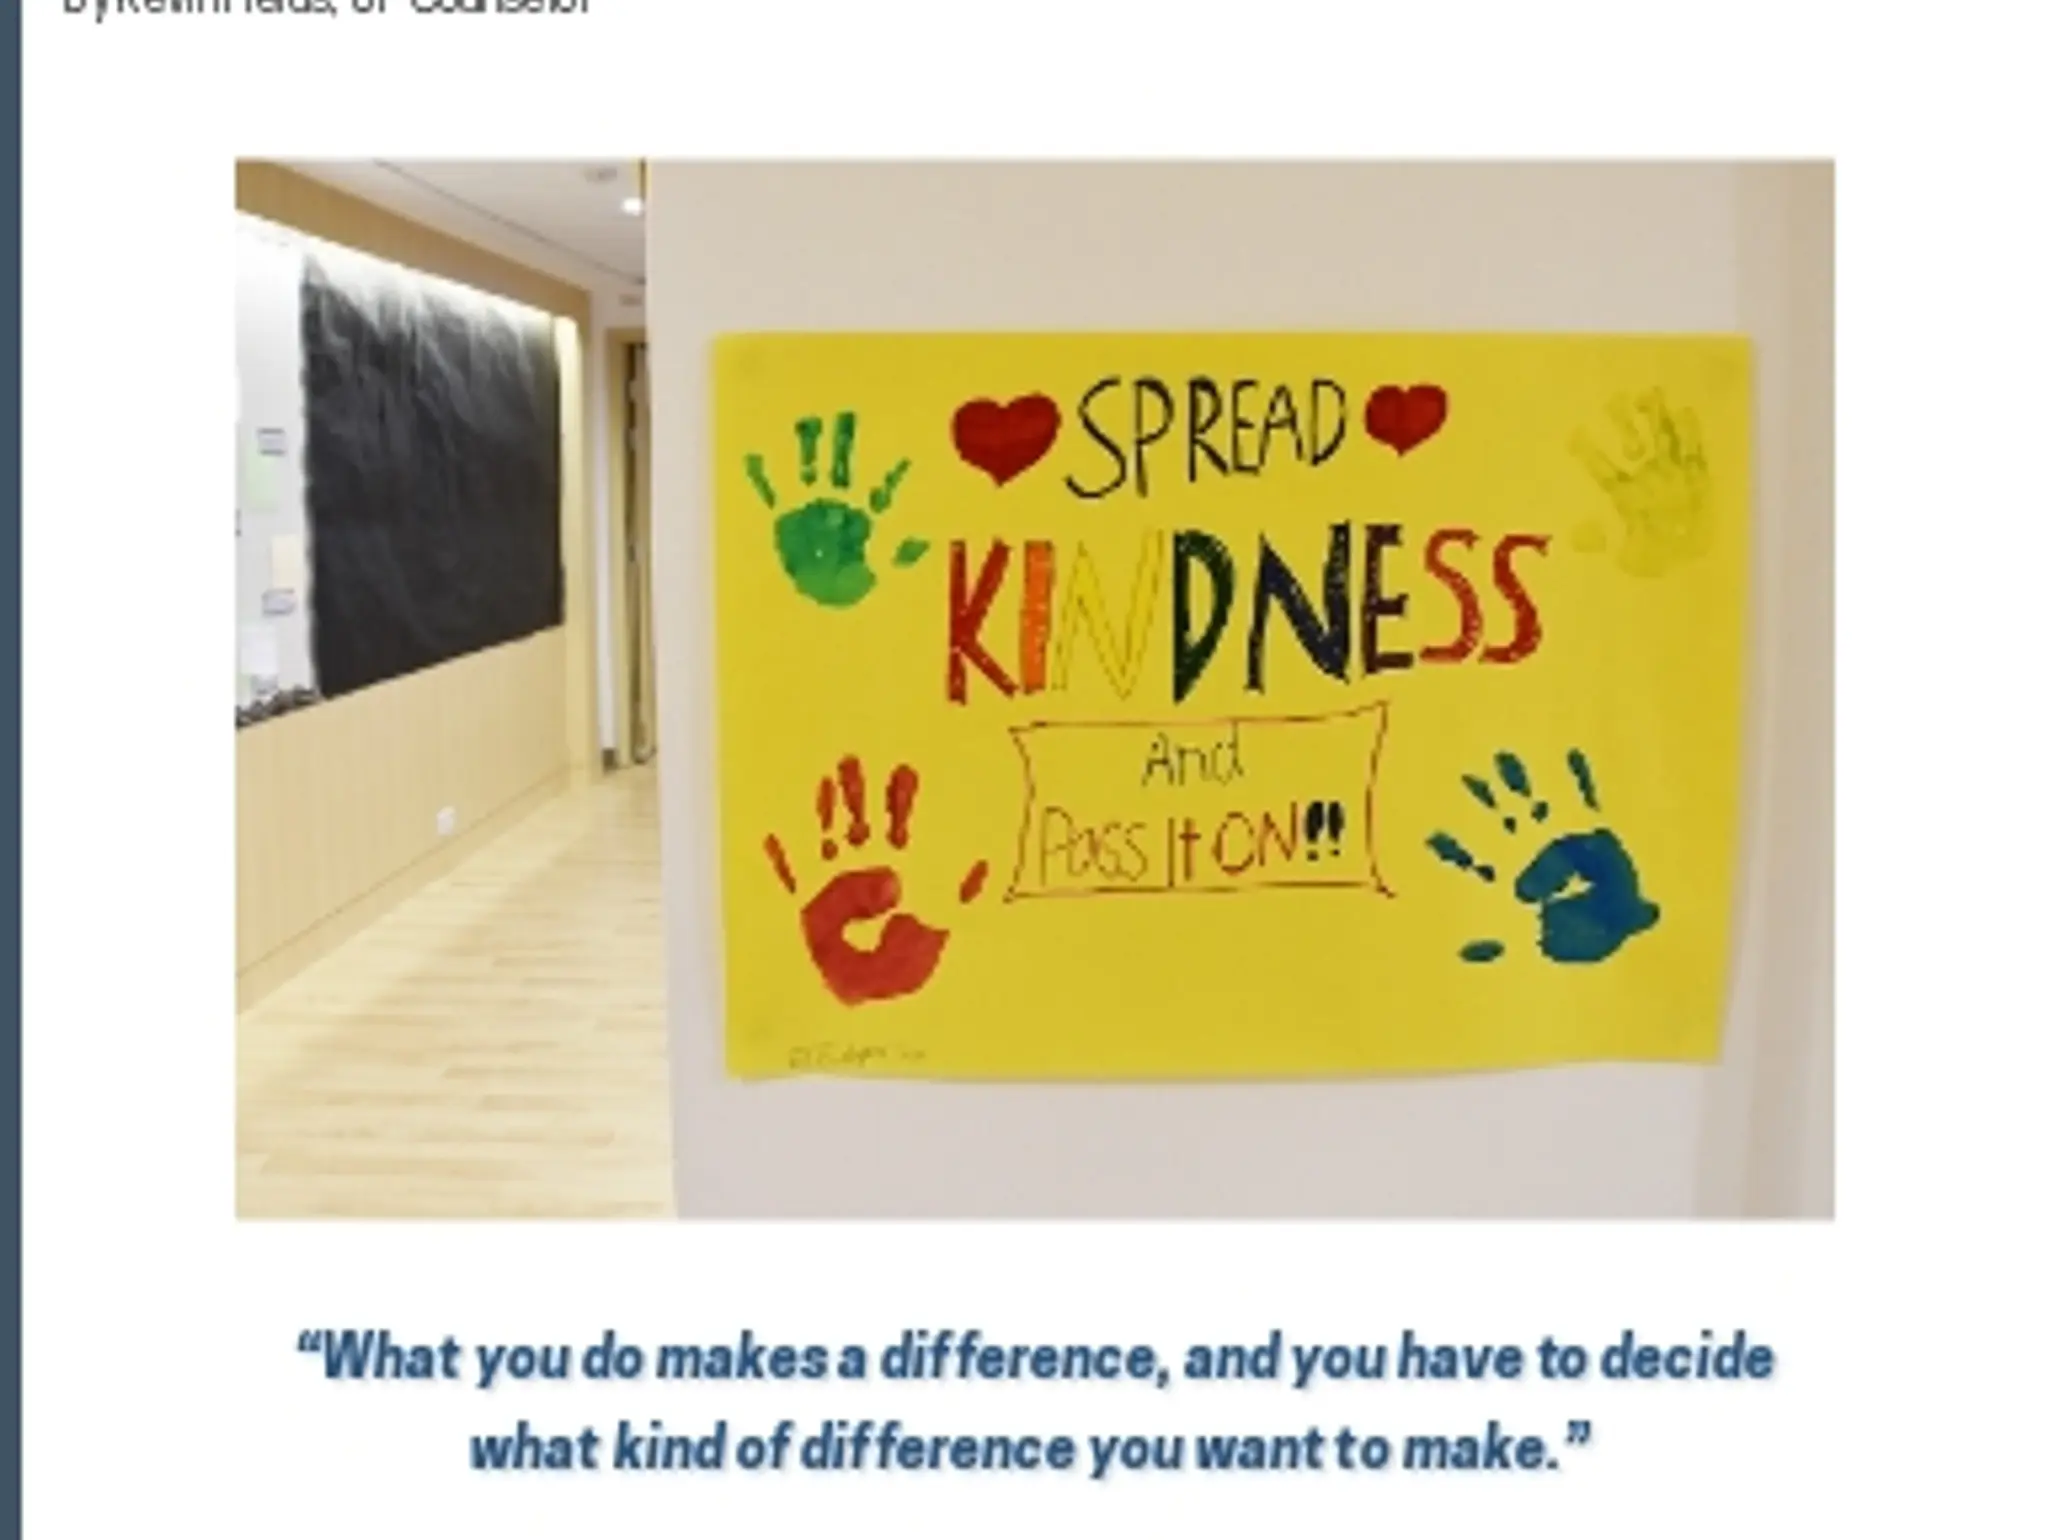 Student Life - UP Kindness Week